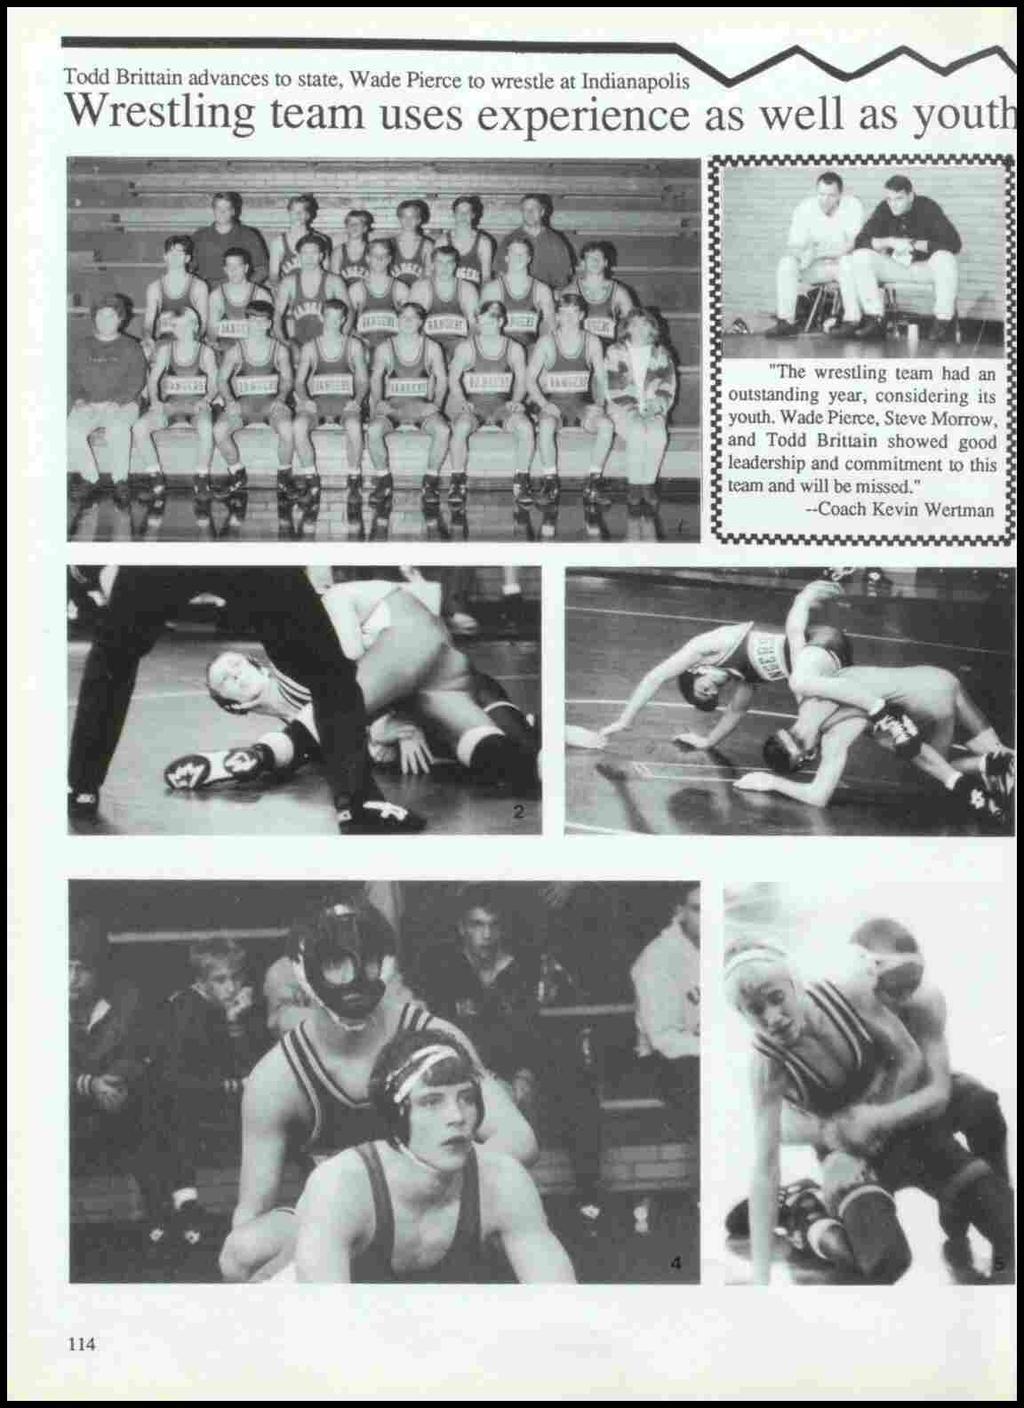 114 "The wrestling team had an outstanding year, considering its youth.